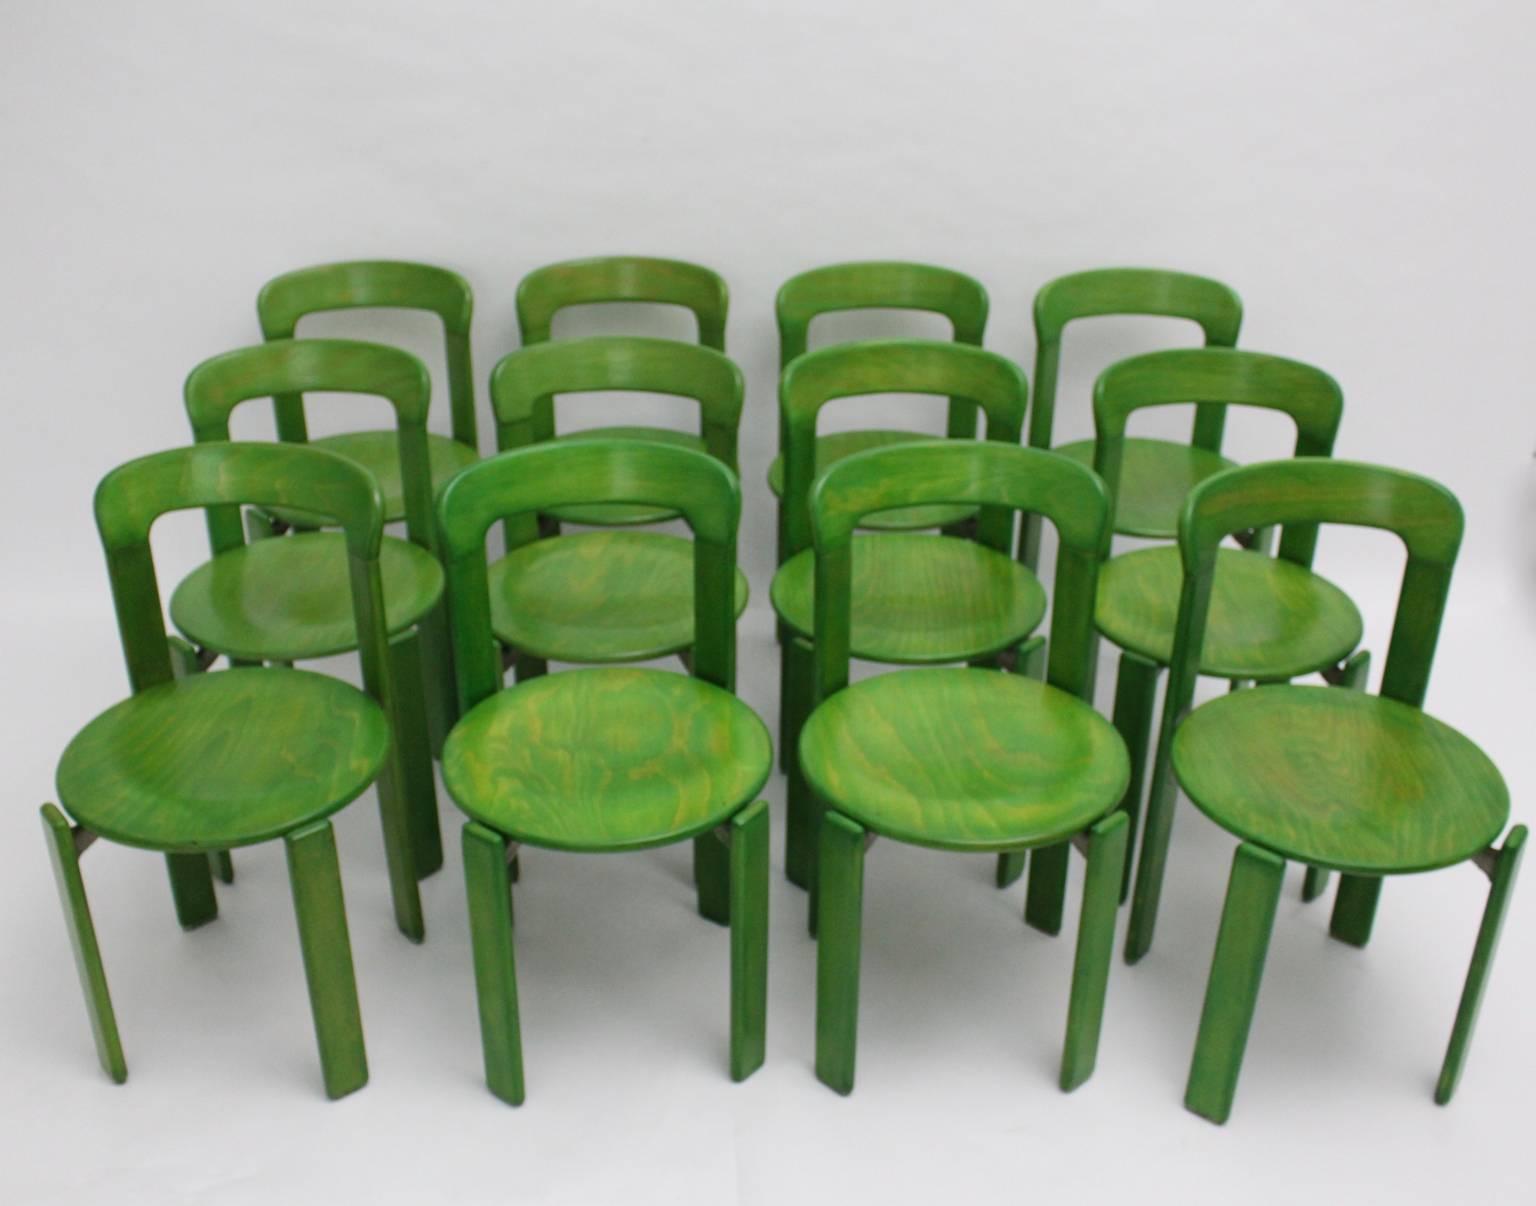 We offer a set of 12 dining room chairs in green color.

These dining room chairs are also stackable.
The dining room chairs were designed by Bruno Rey 1970s, Switzerland and executed by Kusch & Co, Germany.

The dining room chairs were made of